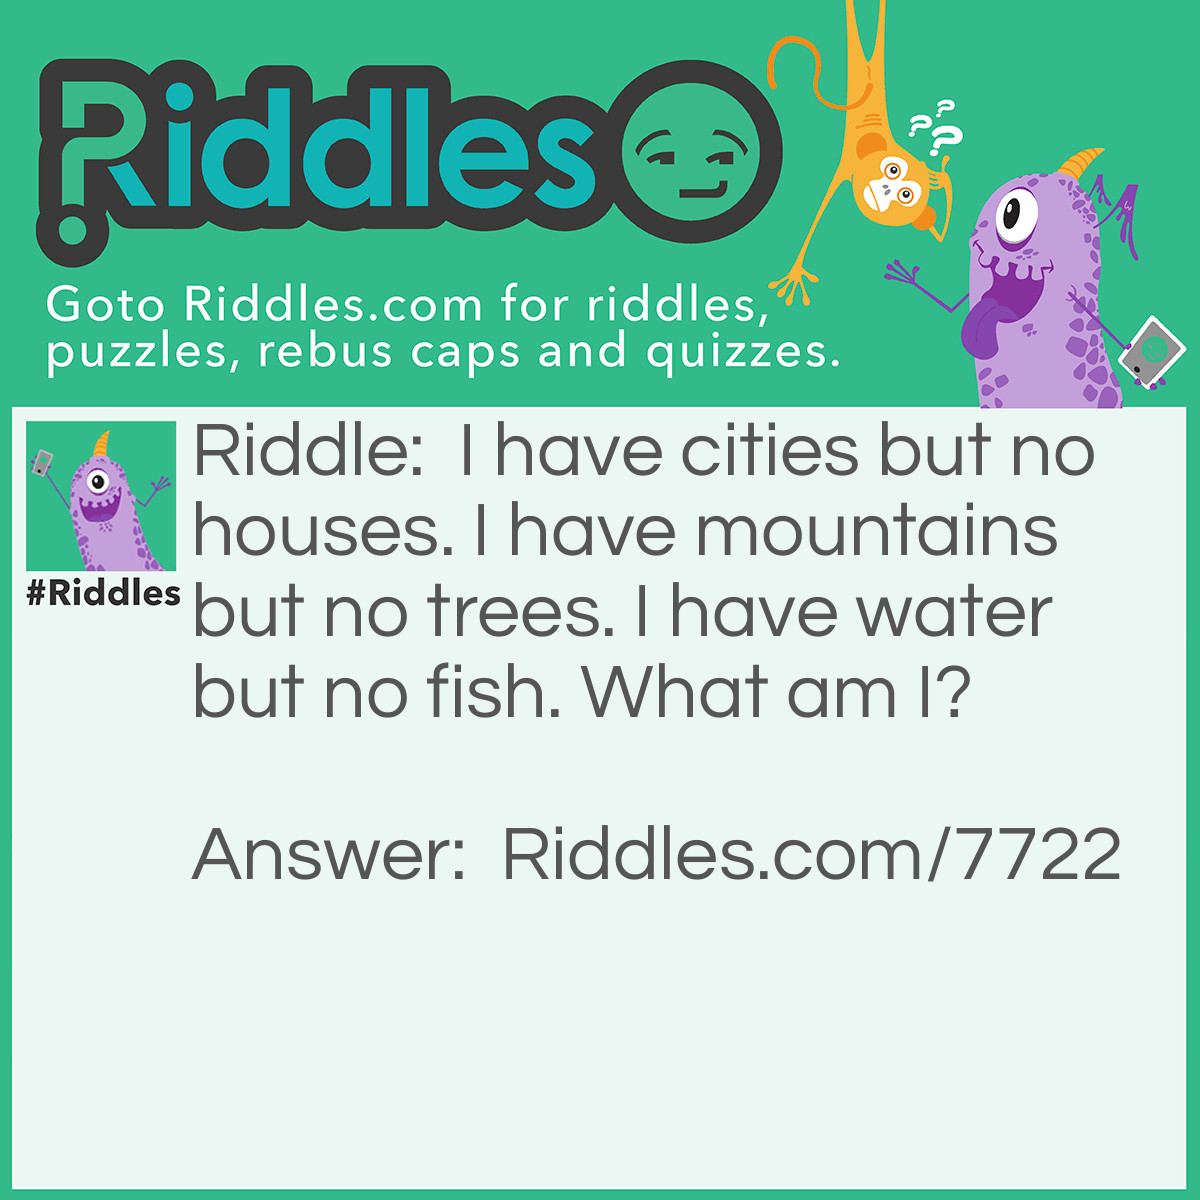 Riddle: I have cities but no houses. I have mountains but no trees. I have water but no fish. What am I? Answer: A map.